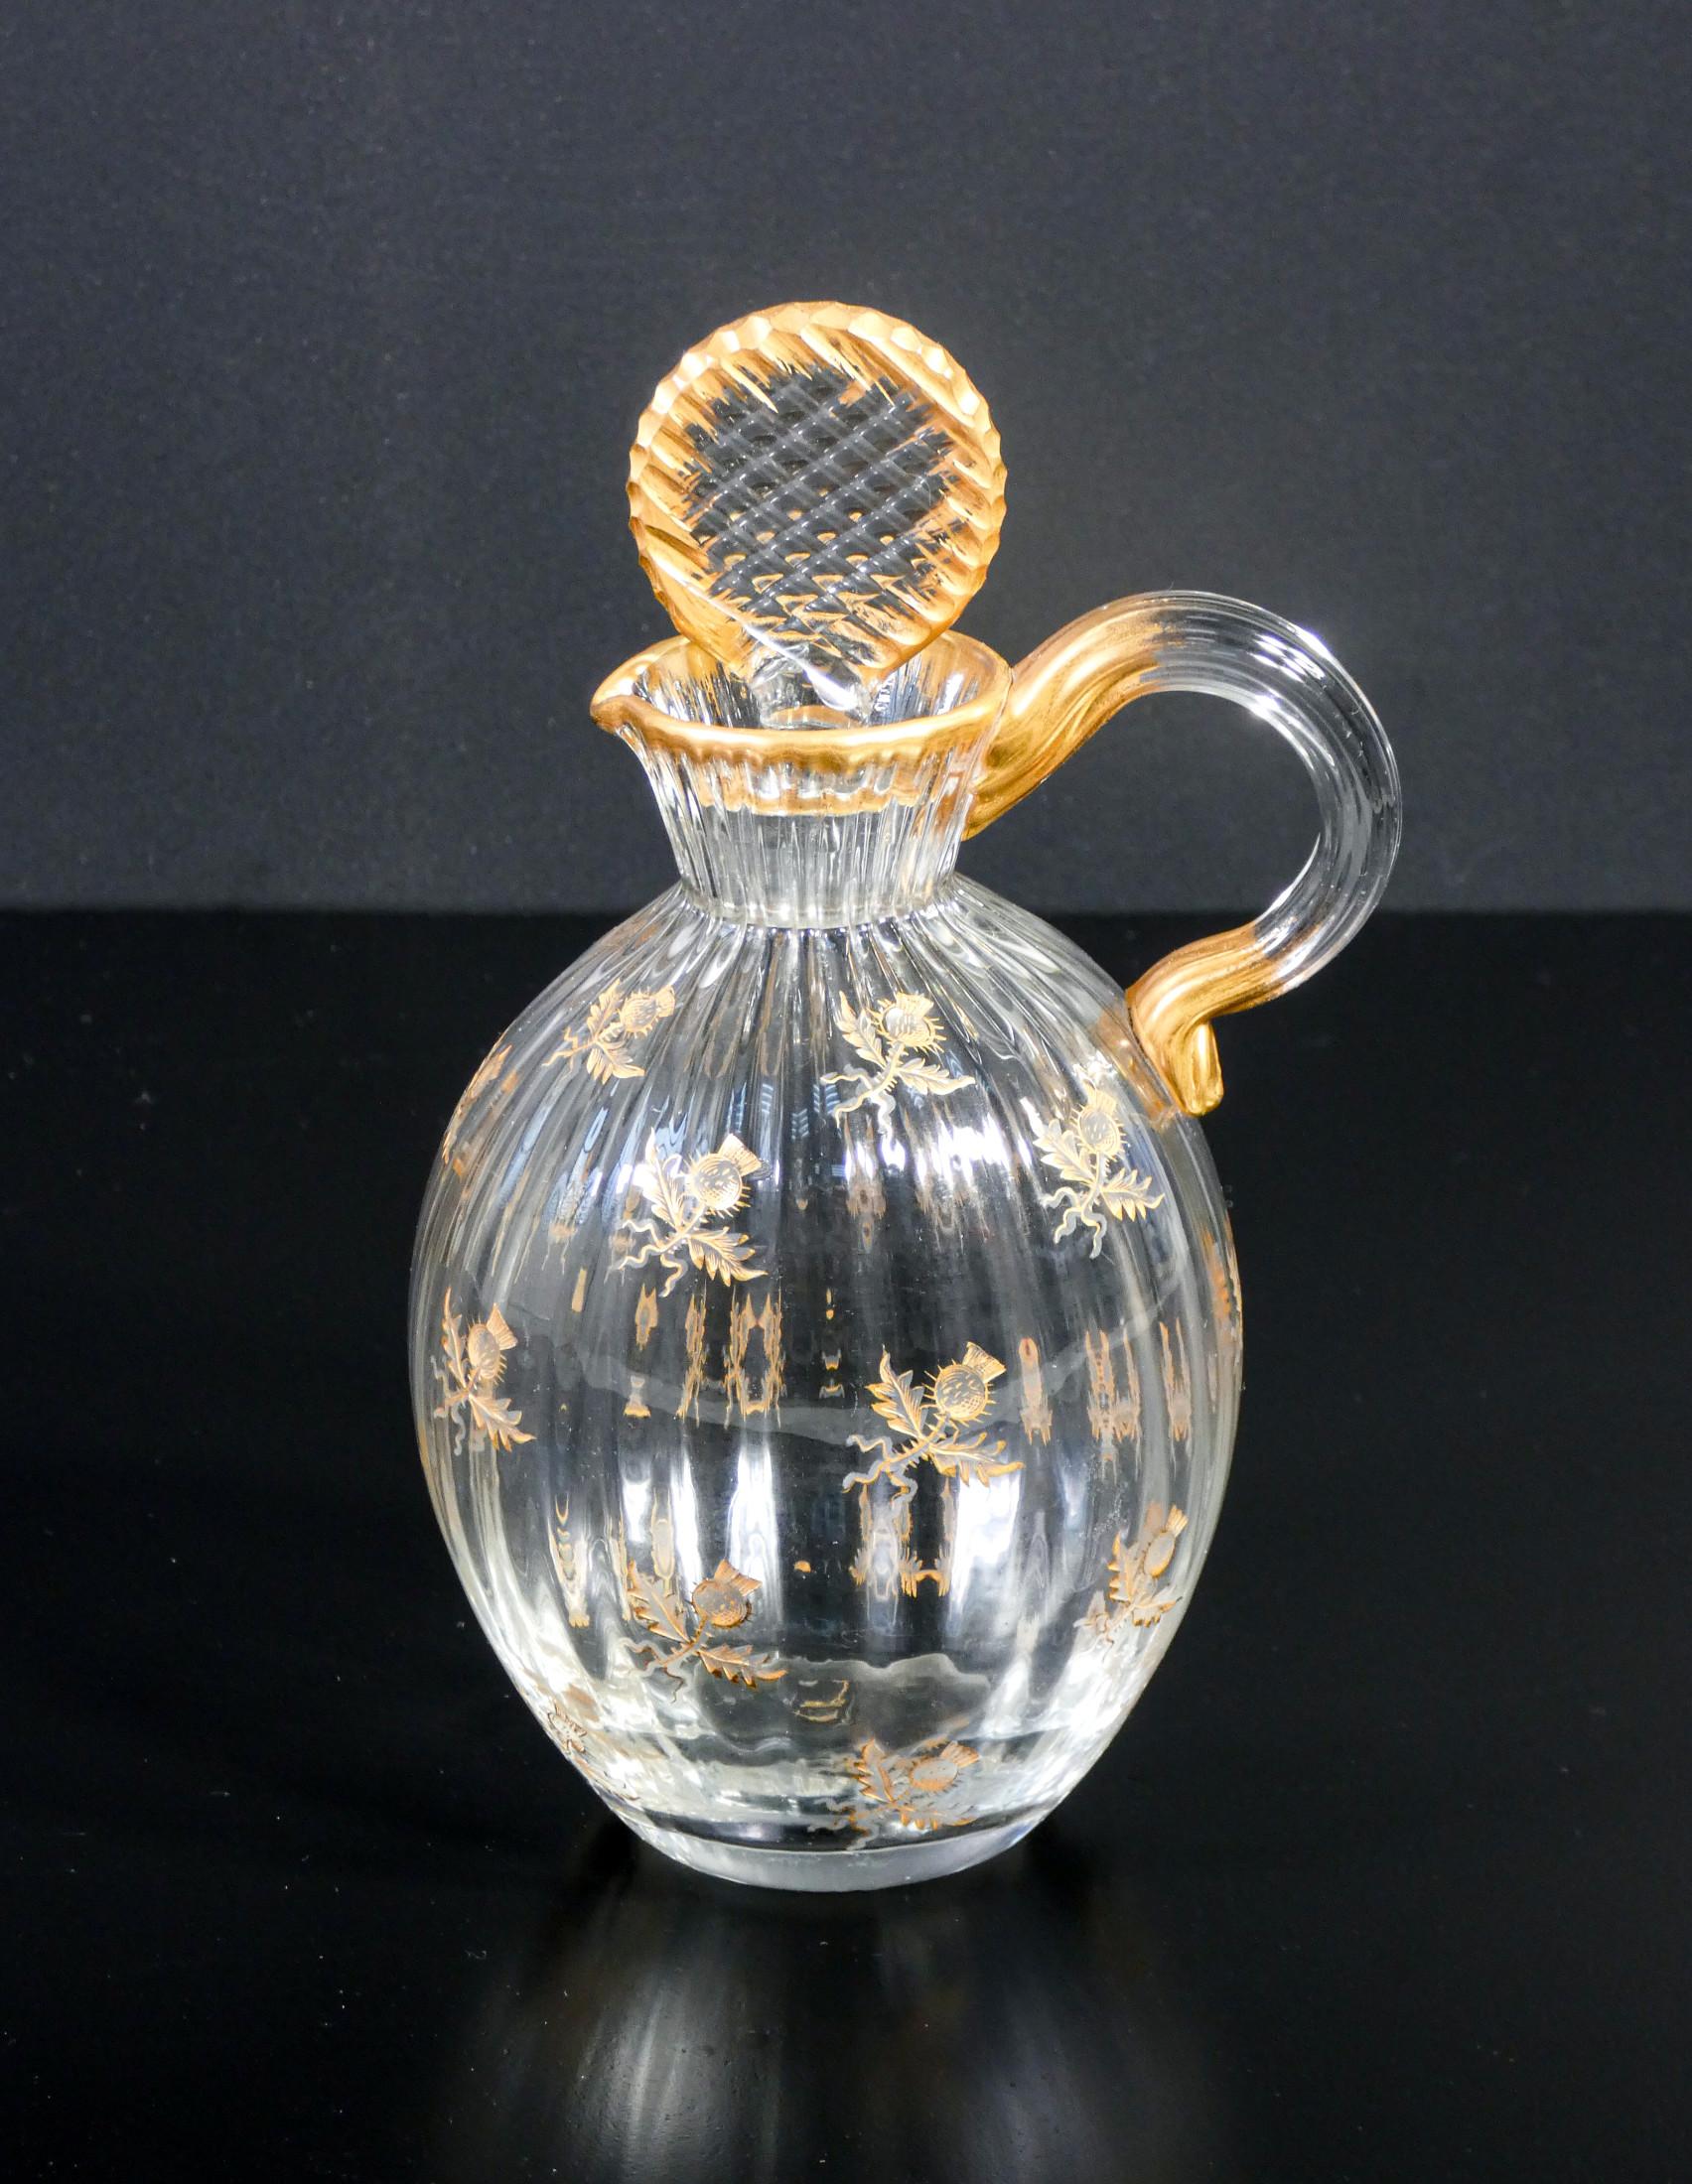 European Blown and Engraved Glass Pourer, Daum Nancy, from the 'Service Ducal', 1891